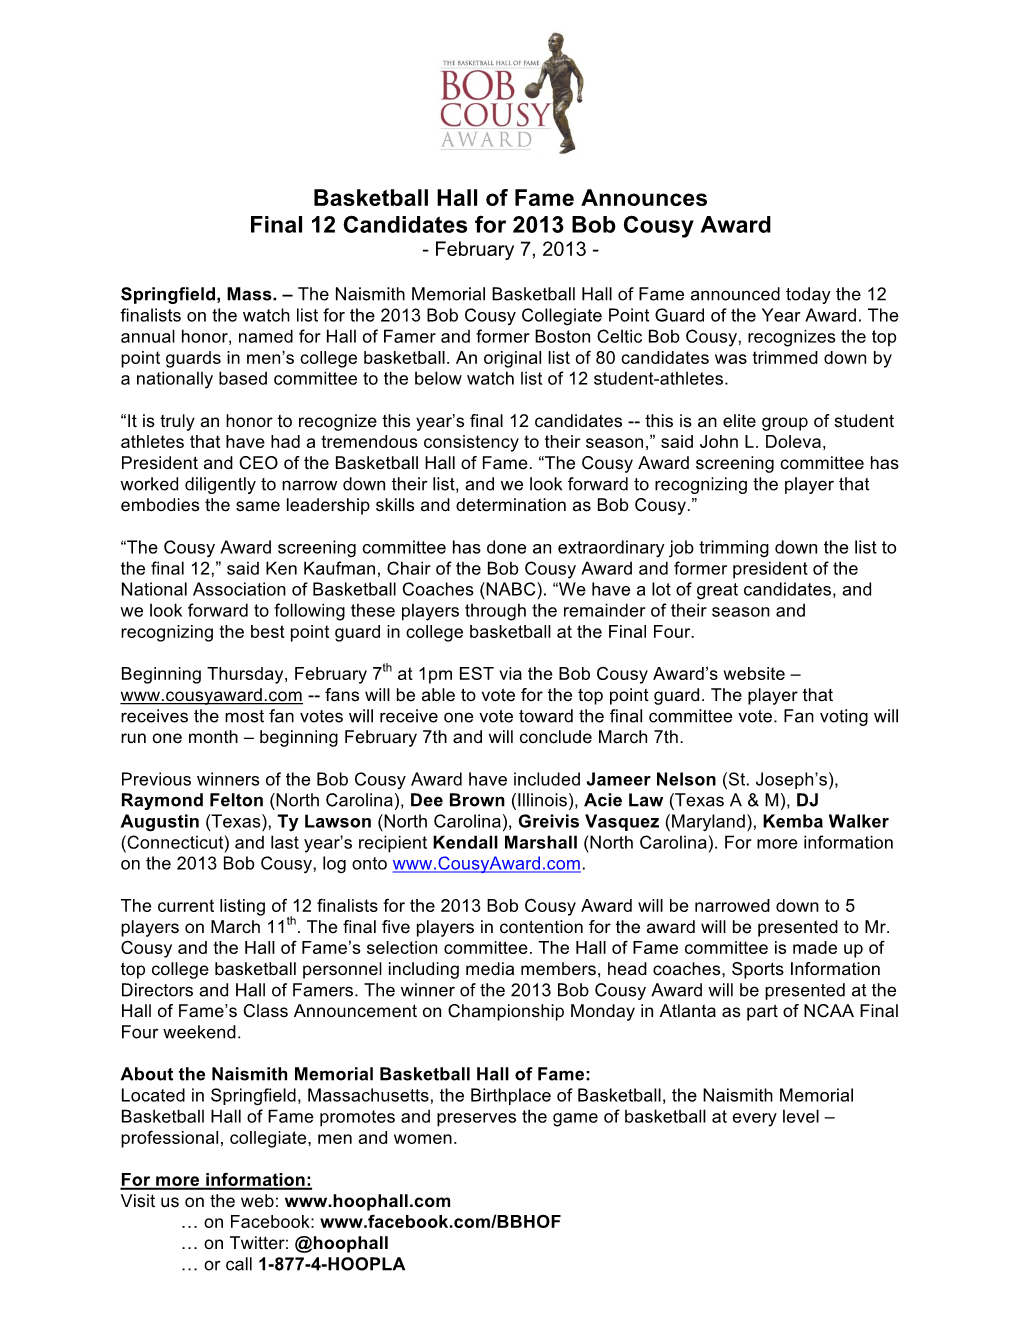 Basketball Hall of Fame Announces Final 12 Candidates for 2013 Bob Cousy Award - February 7, 2013